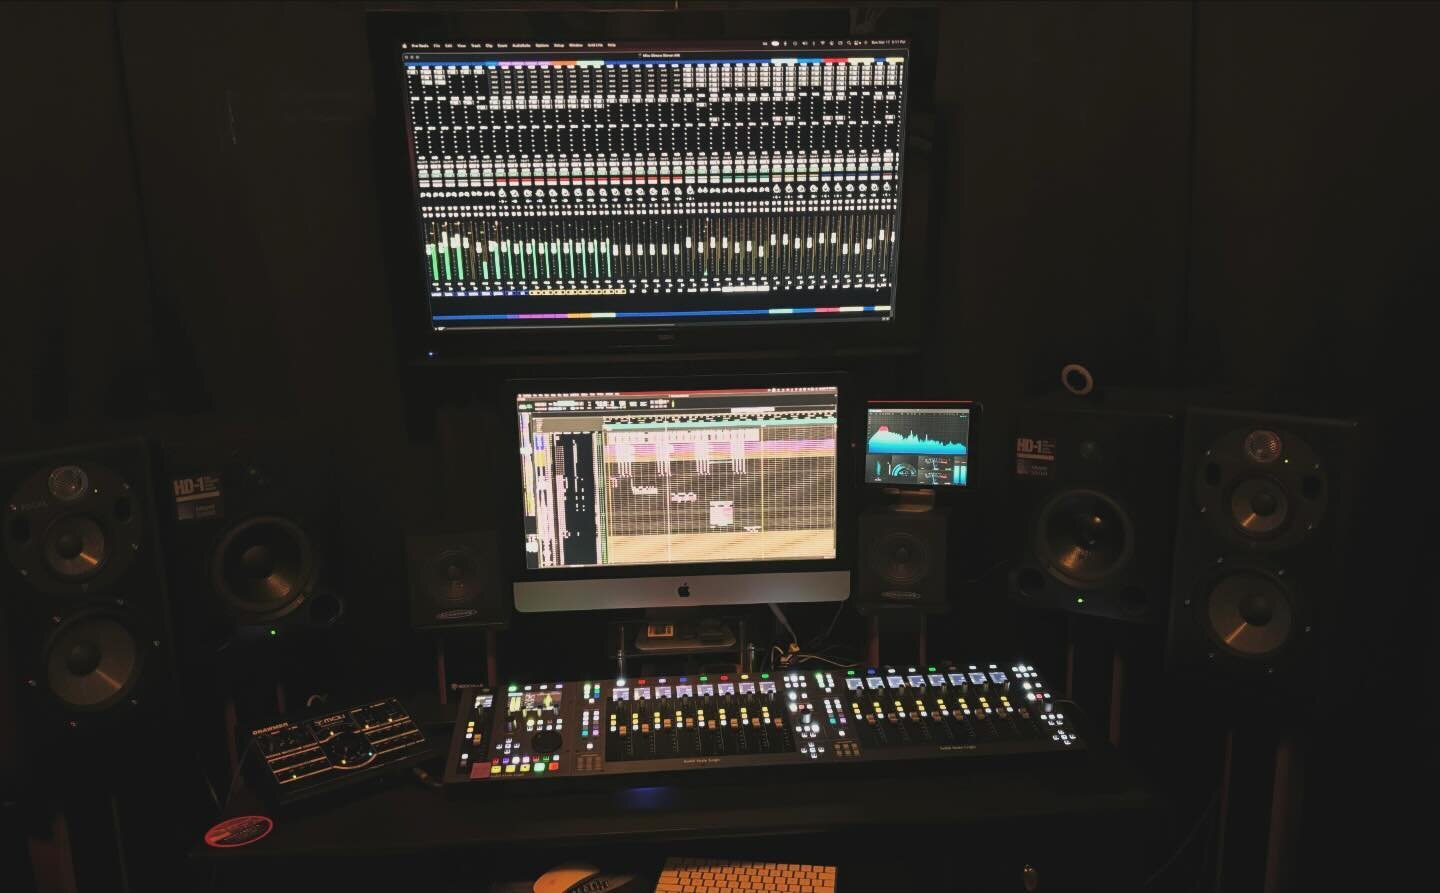 Just finished mixing the new single (I think) for @kintosolxvida featuring @tornillovazquez_  Now starting a mix for @gauge35
#thestonesound #studiolife